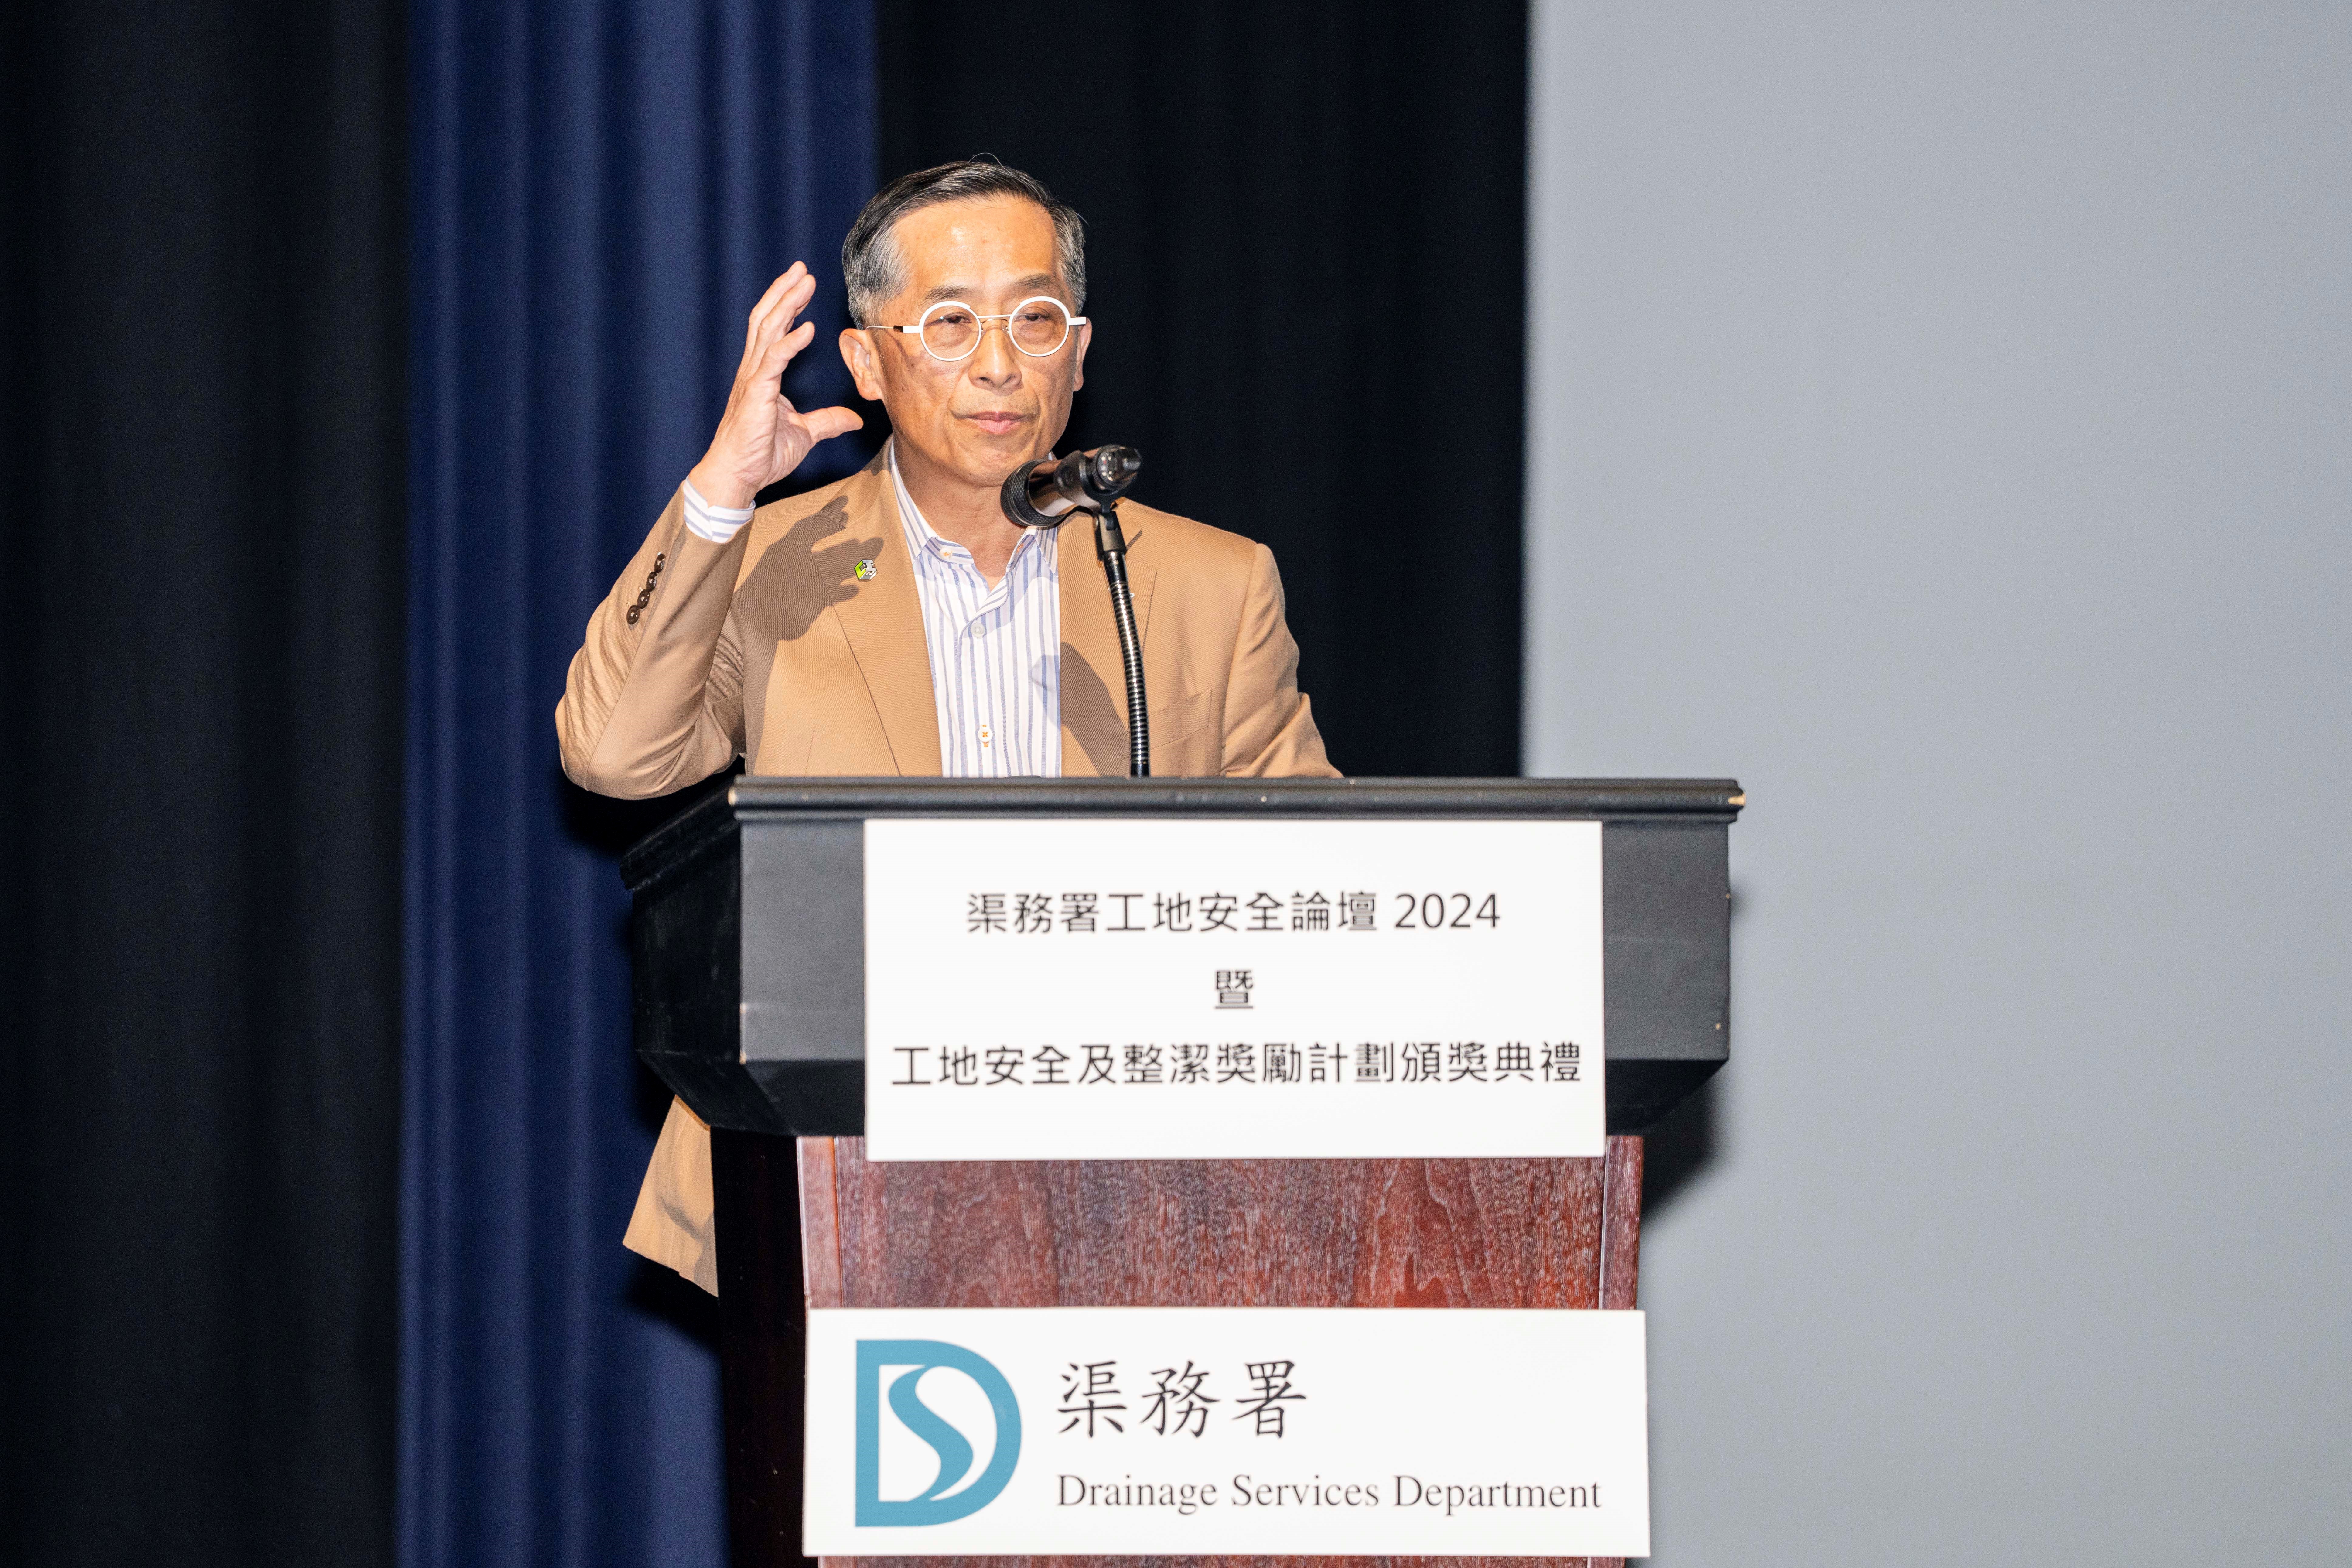 Ir Prof. Thomas HO, the Chairman of the Construction Industry Council, delivered a keynote speech at the Site Safety Forum 2024 cum Construction Sites Safety and Housekeeping Award Presentation Ceremony